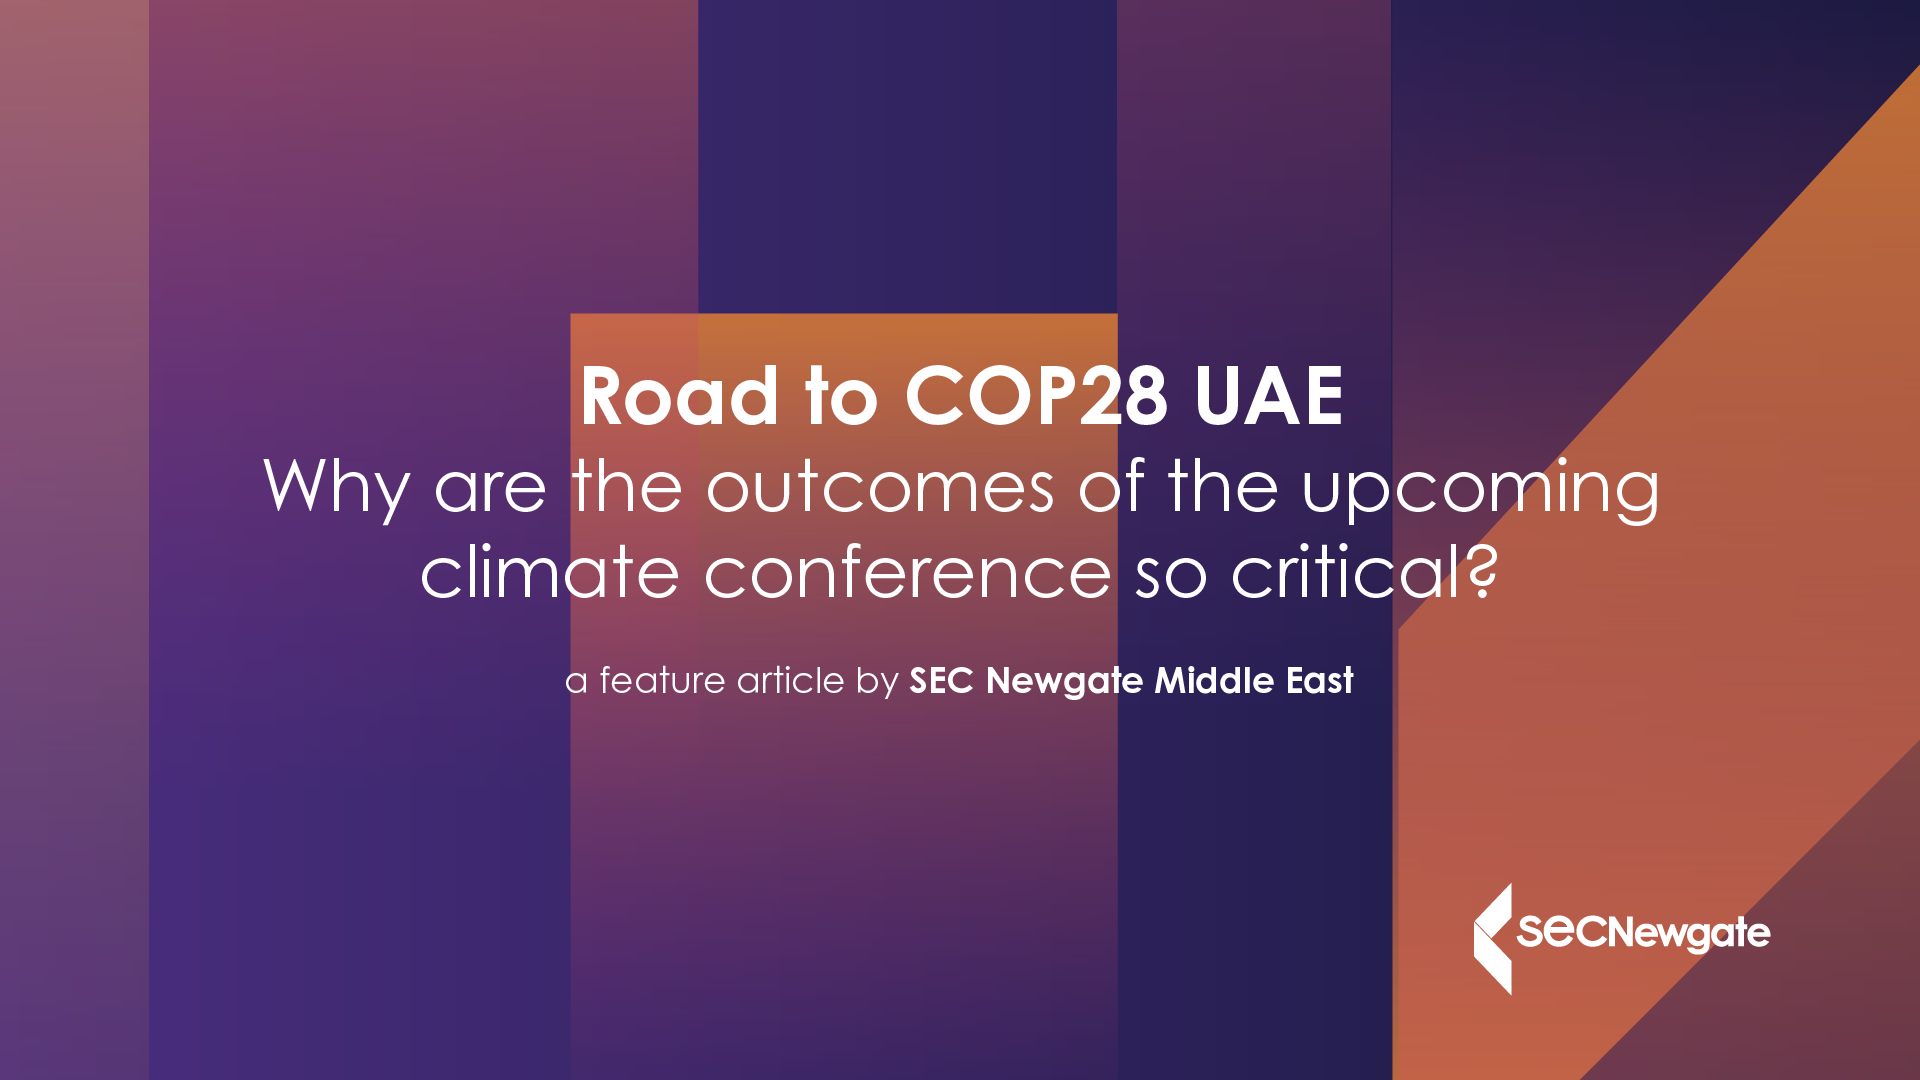 COP 28 UAE the most important climate conference to date? SEC